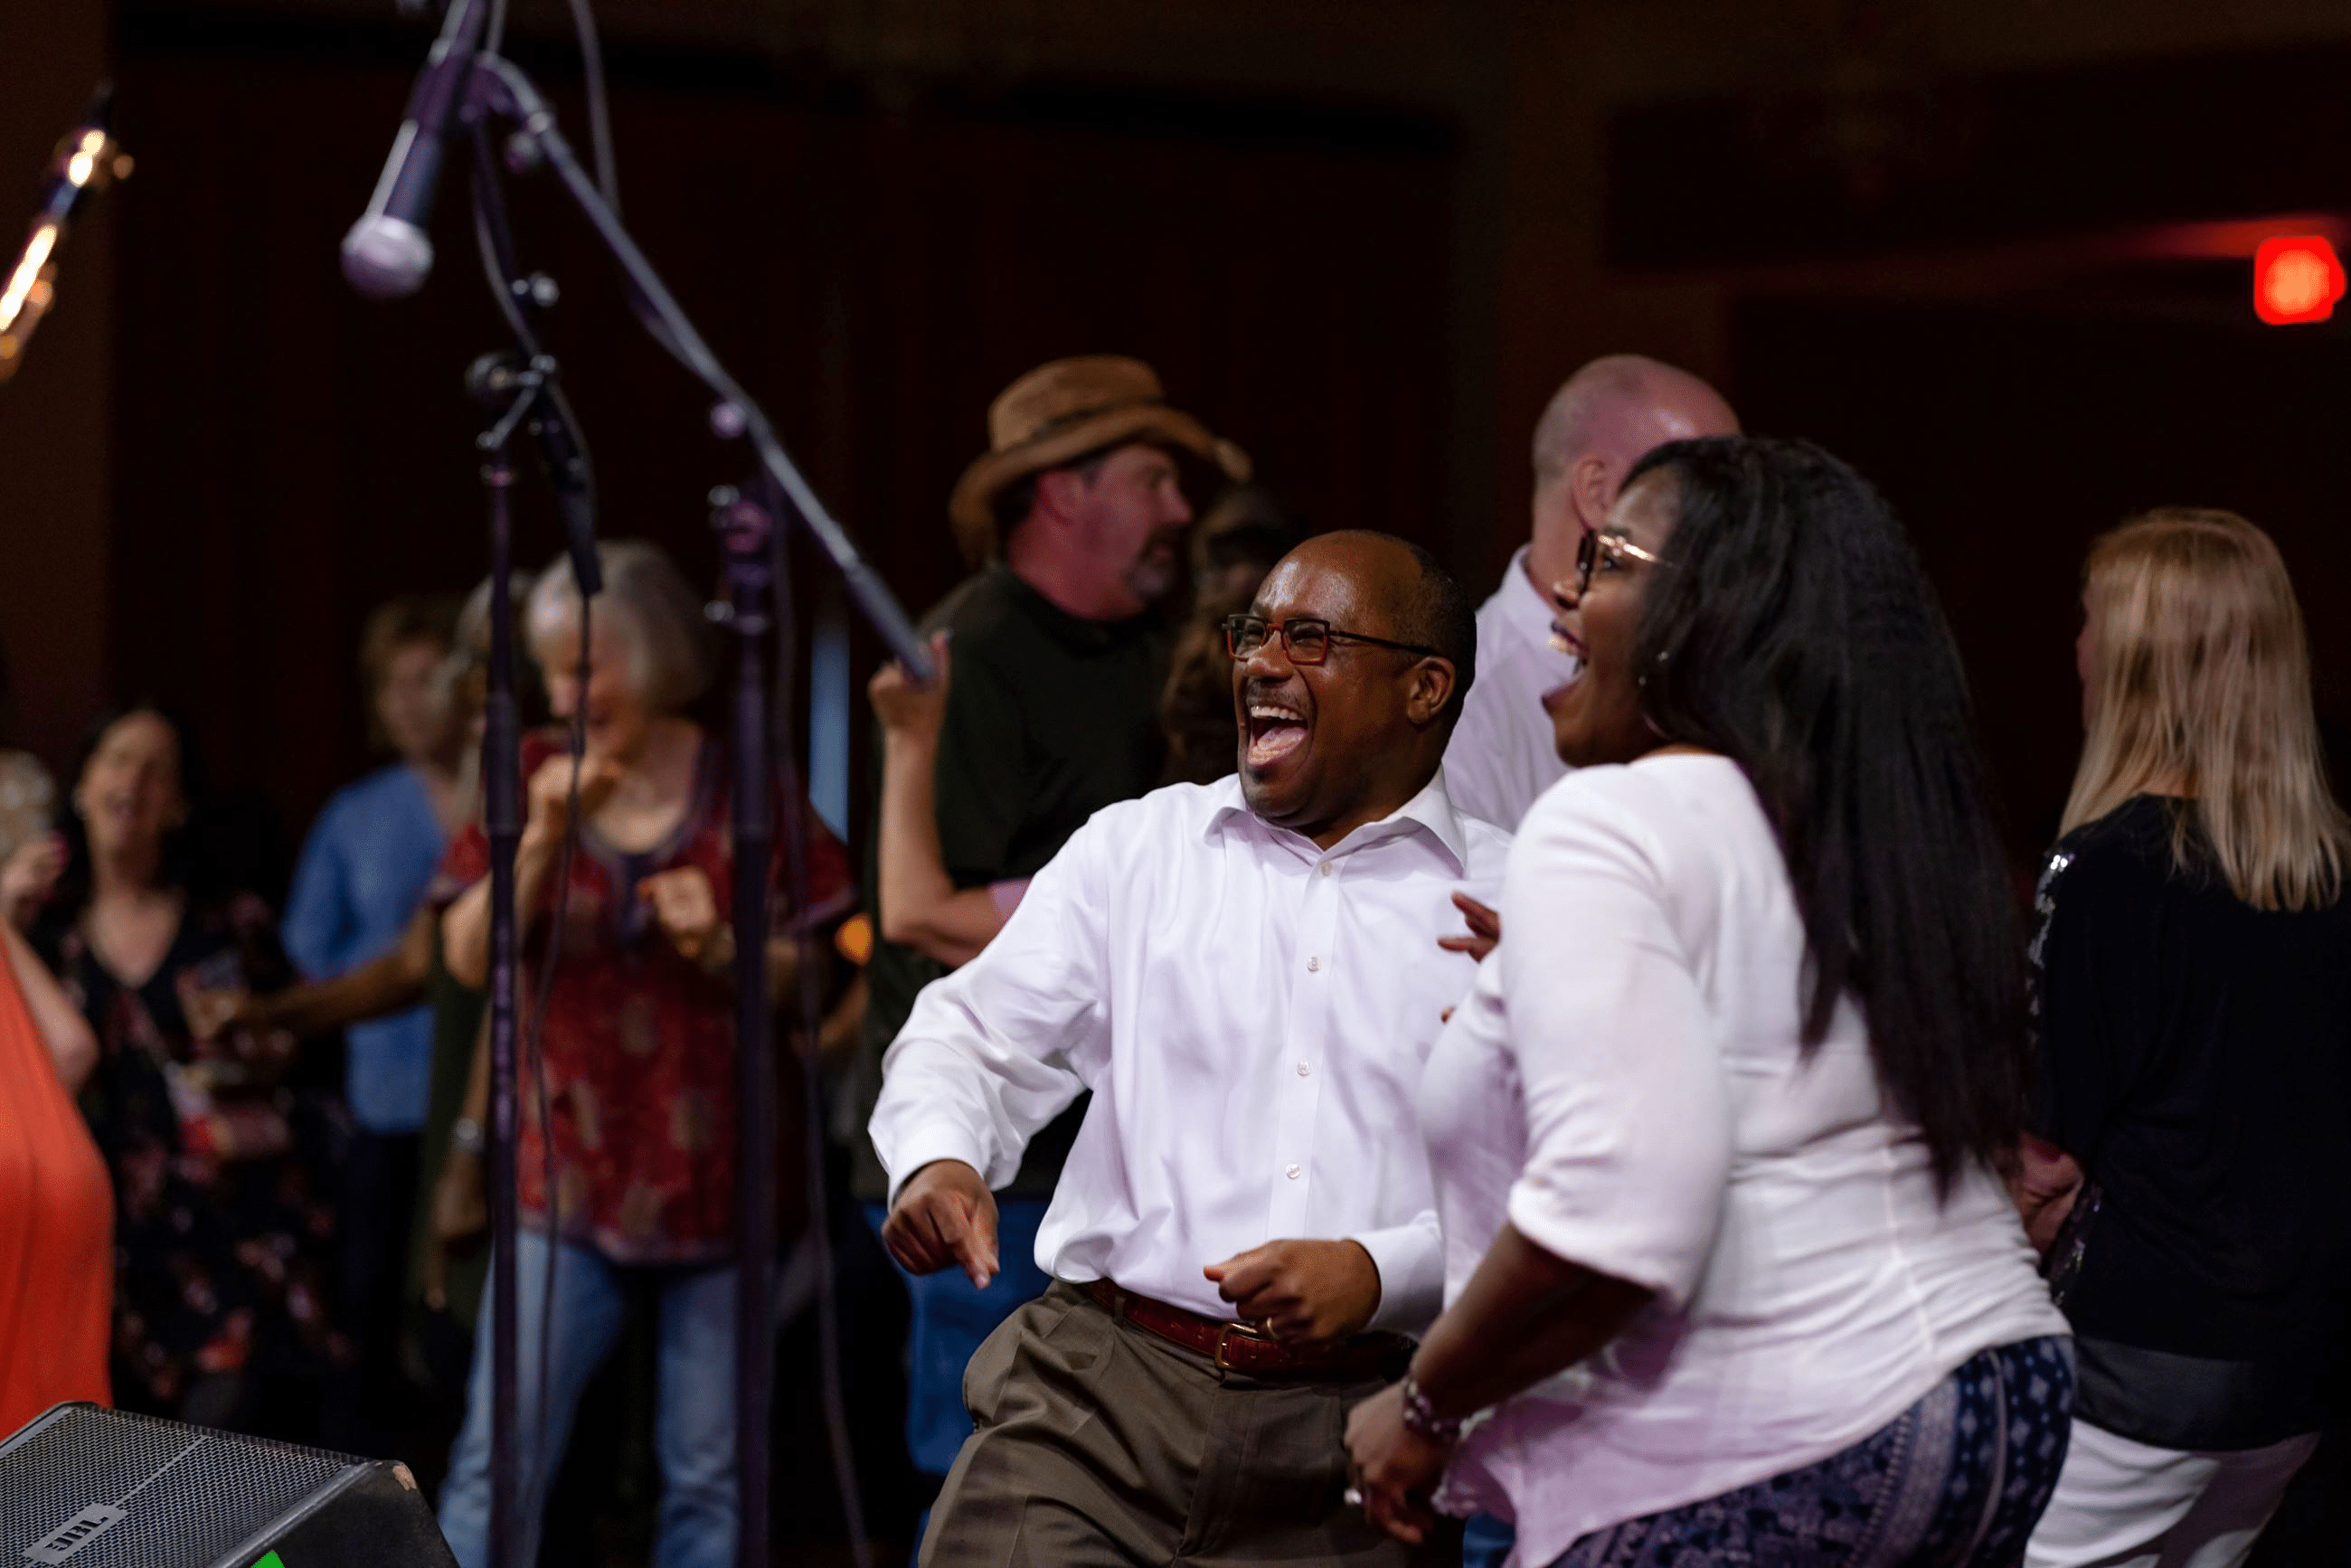 Two people in white shirts dancing at a concert.